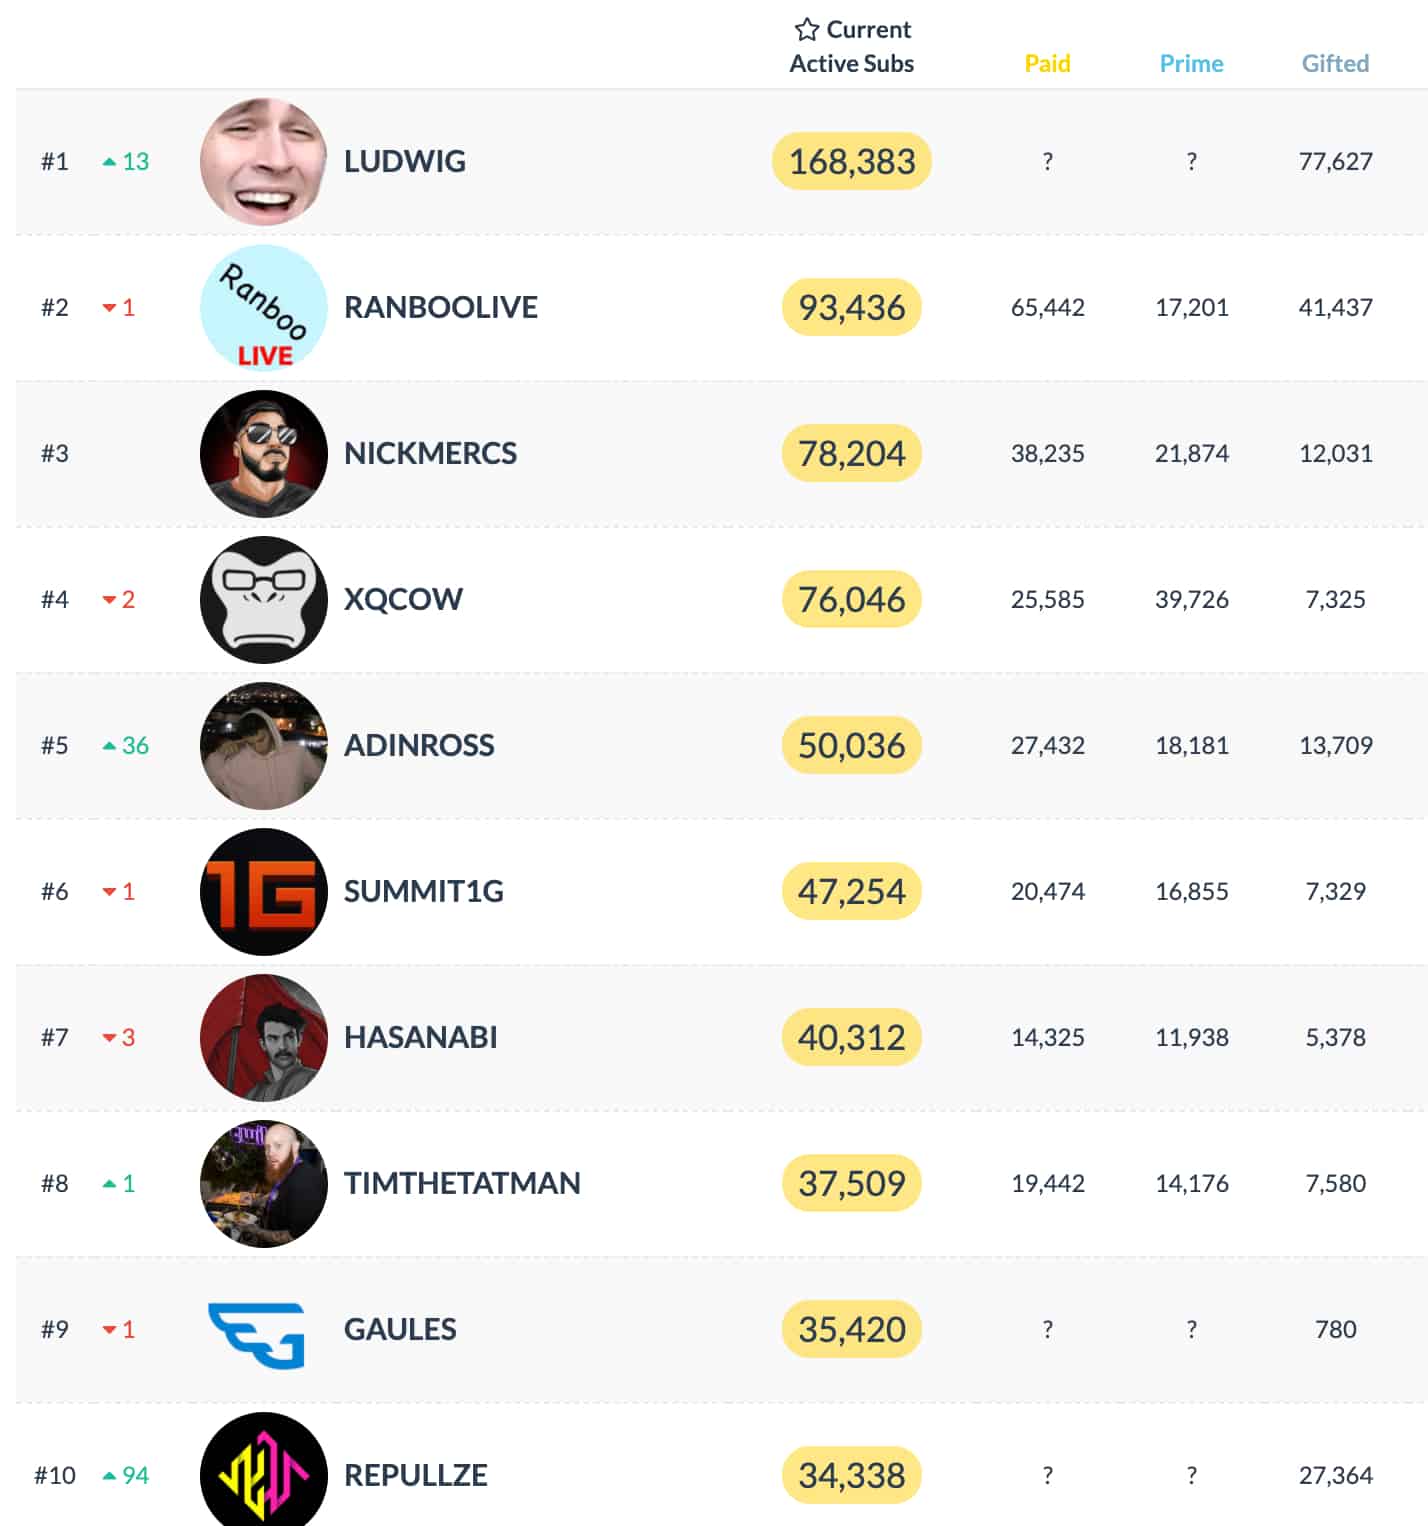 Top 10 most subbed streamers